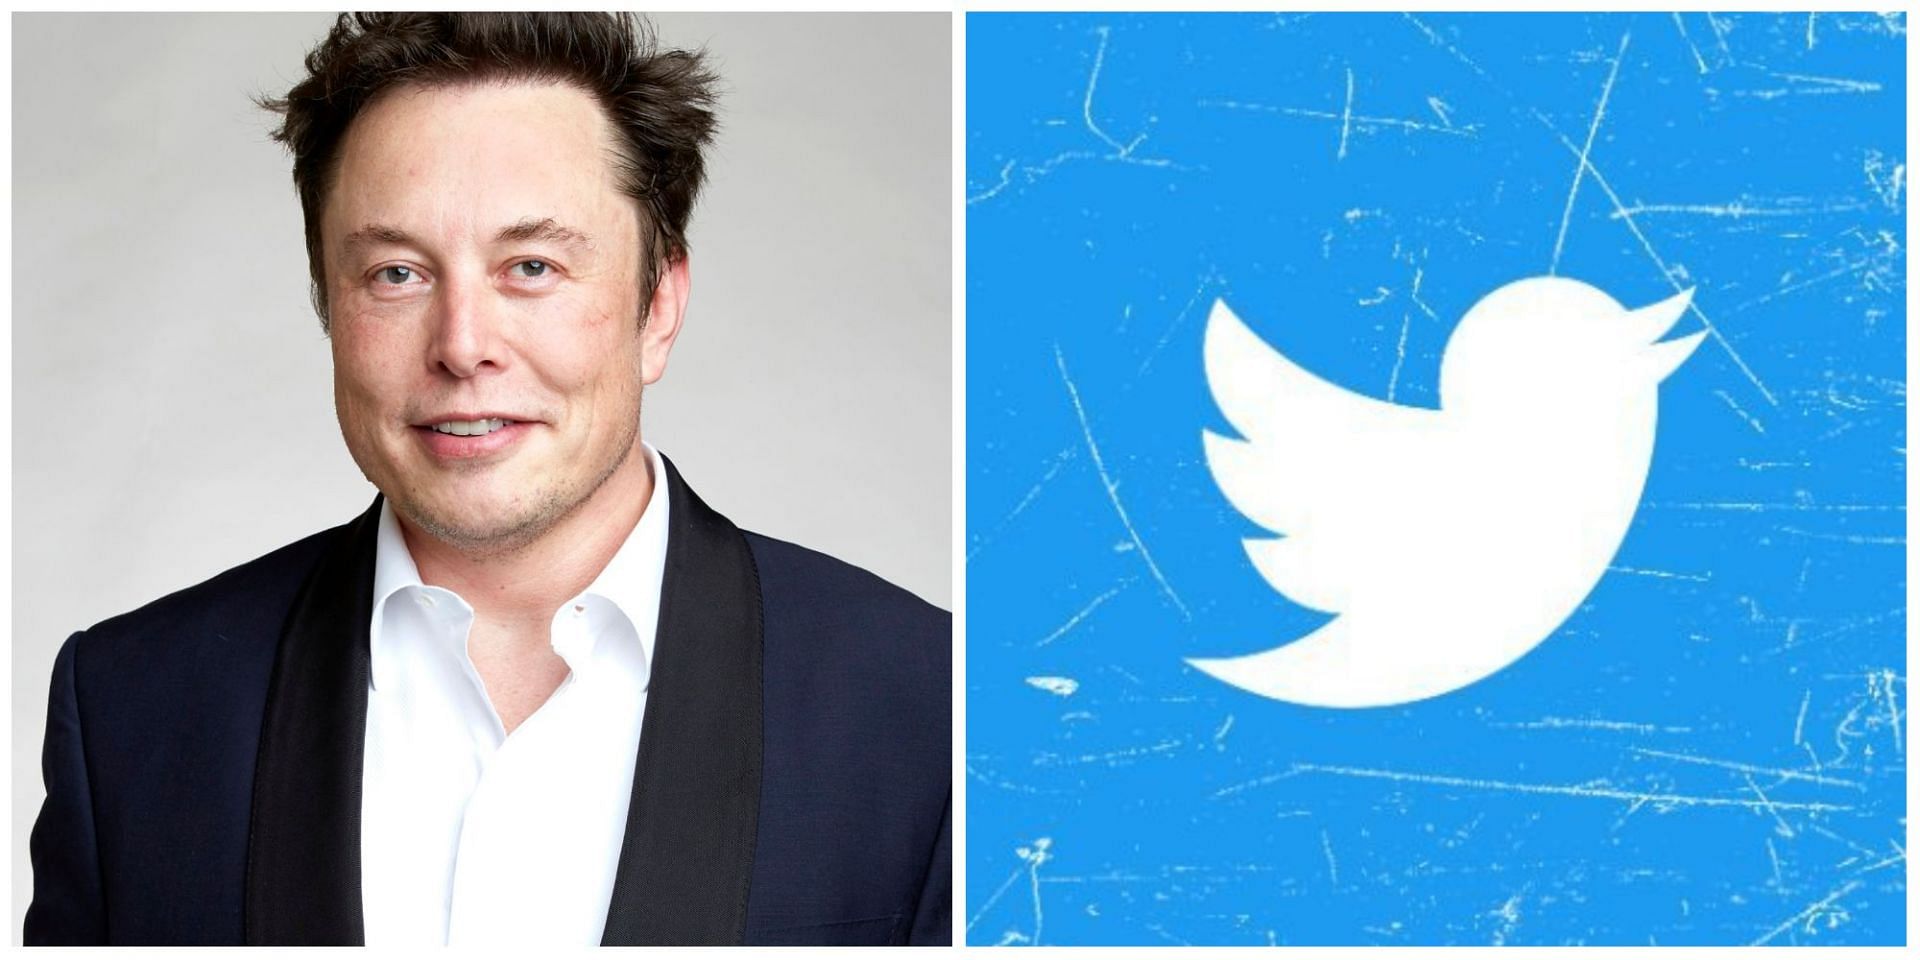 Why did Elon Musk unban the journalists? Details explored. (Image via Twitter)